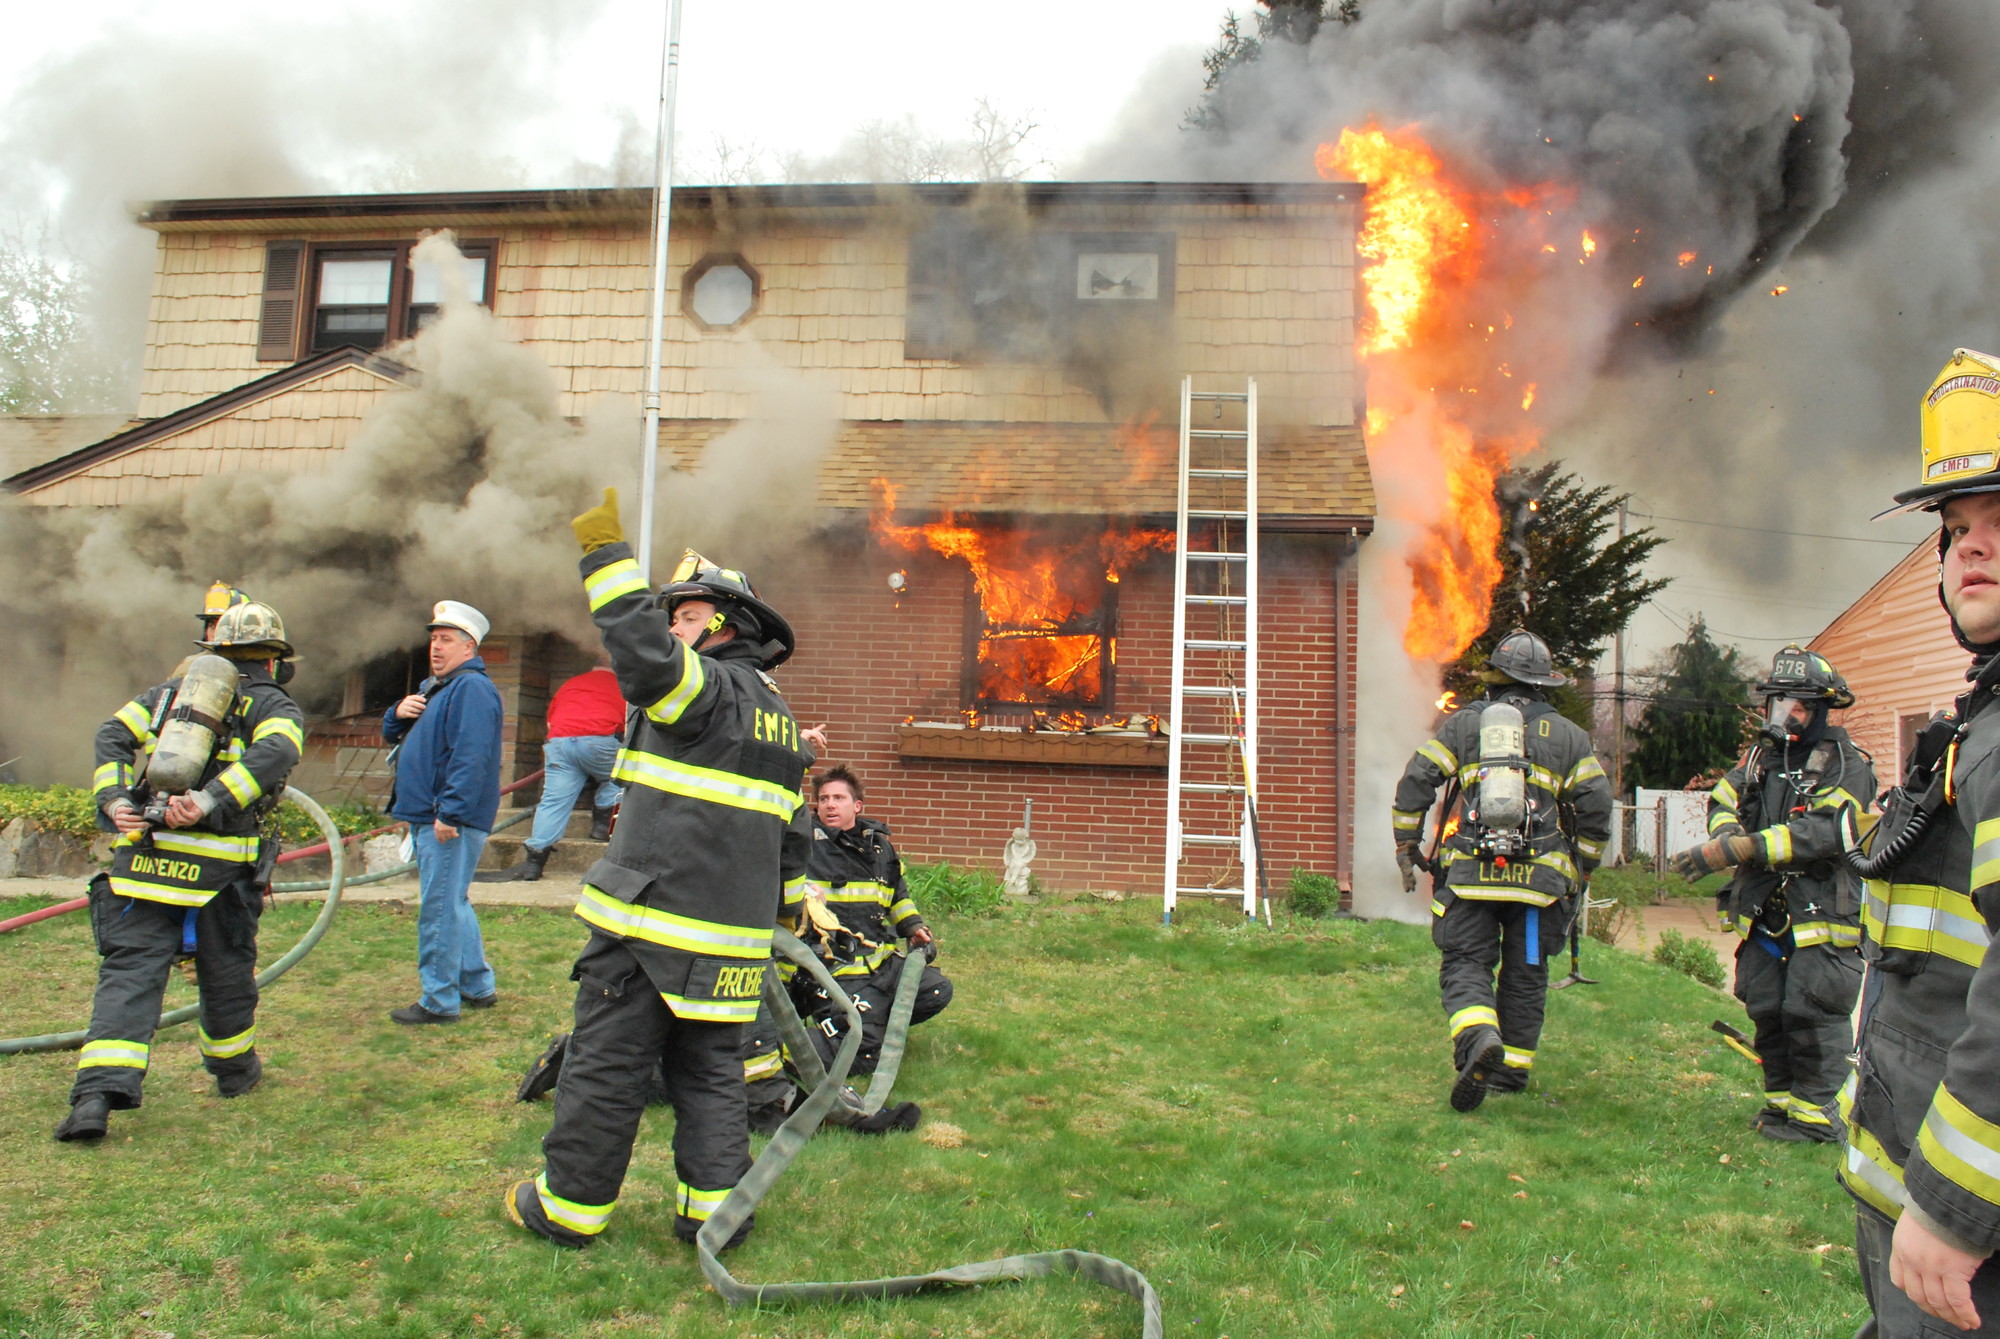 The fire originated in the house's basement and quickly spread to the first and second floors.